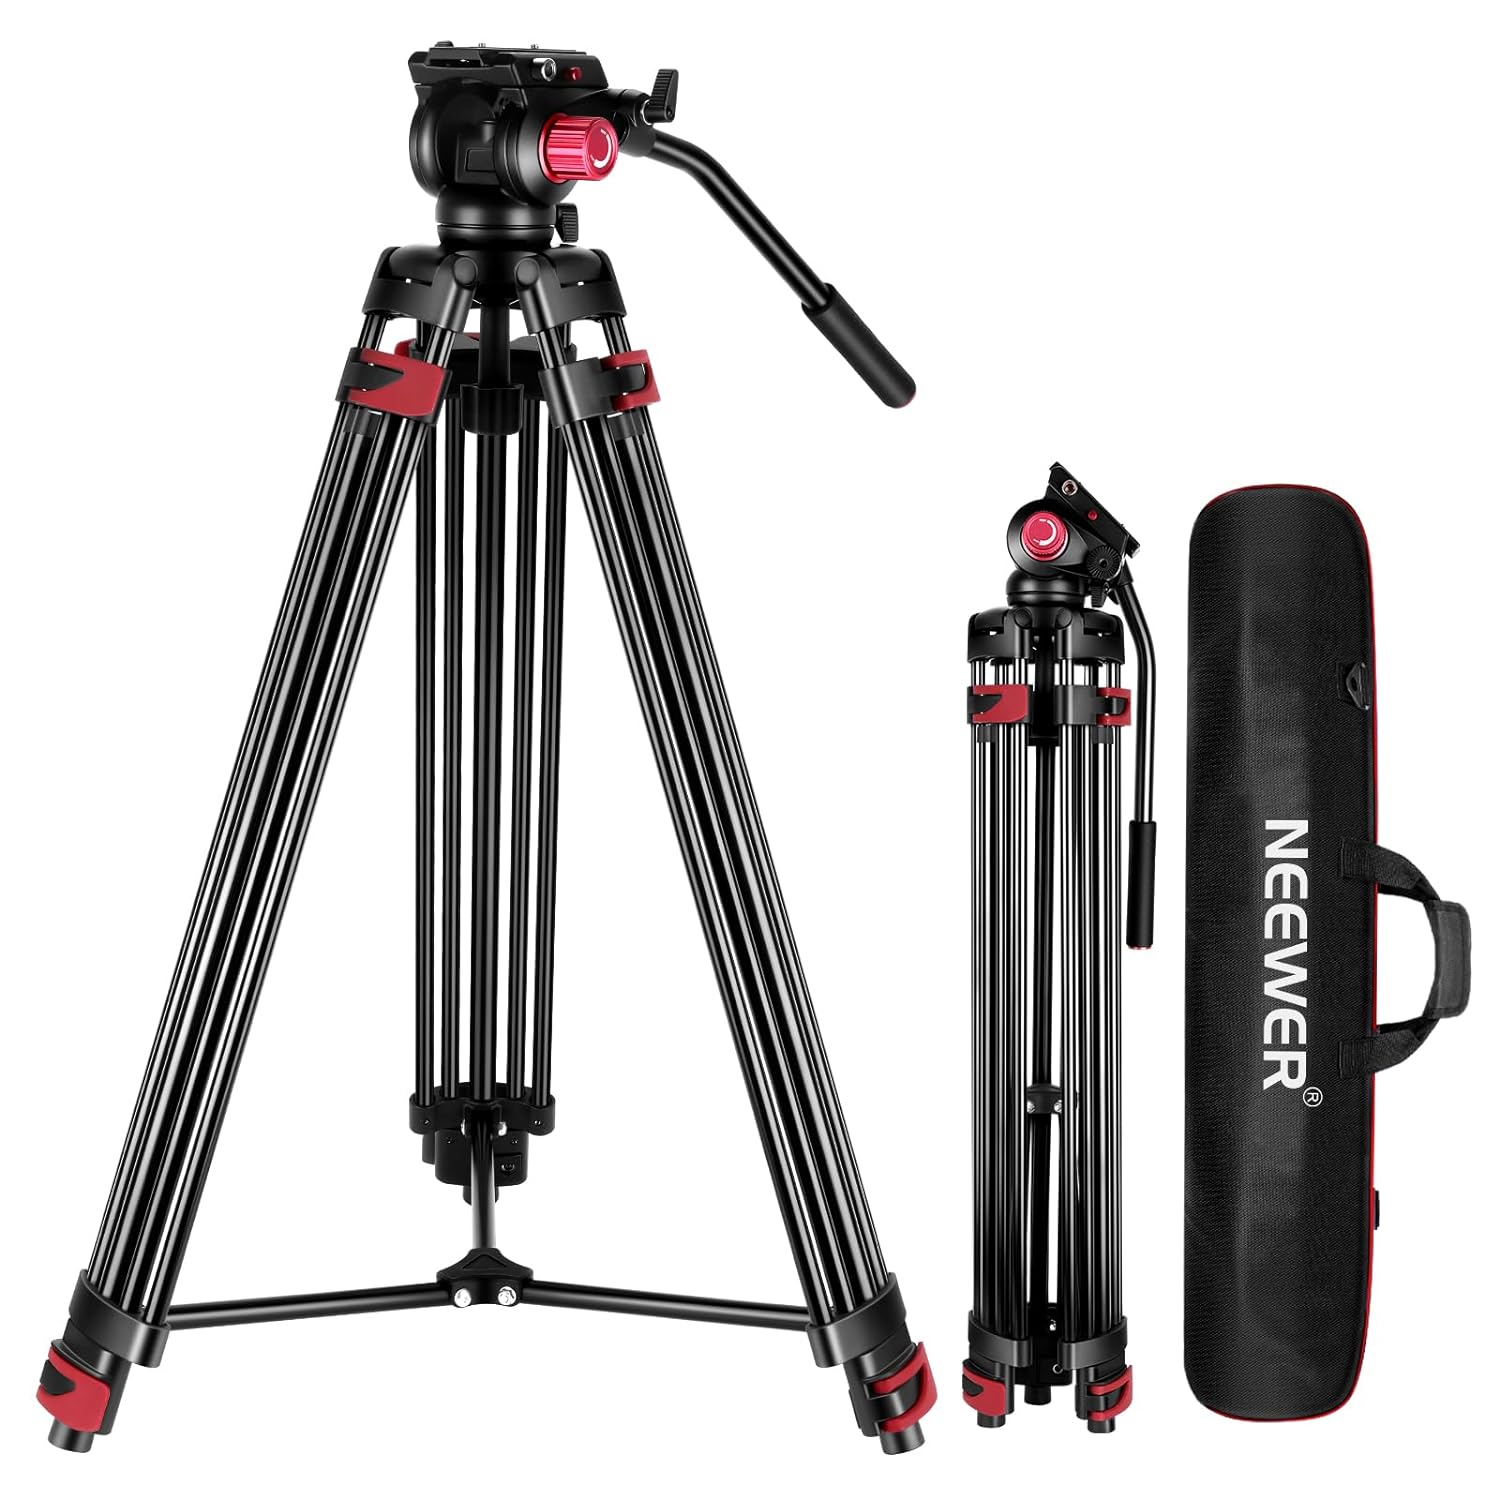 NEEWER Zell 79"/200Cm Video Tripod, Heavy Duty Aluminum Alloy Camera Tripod Stand With 360° Fluid Drag Head, Qr Plate Compatible Wit…